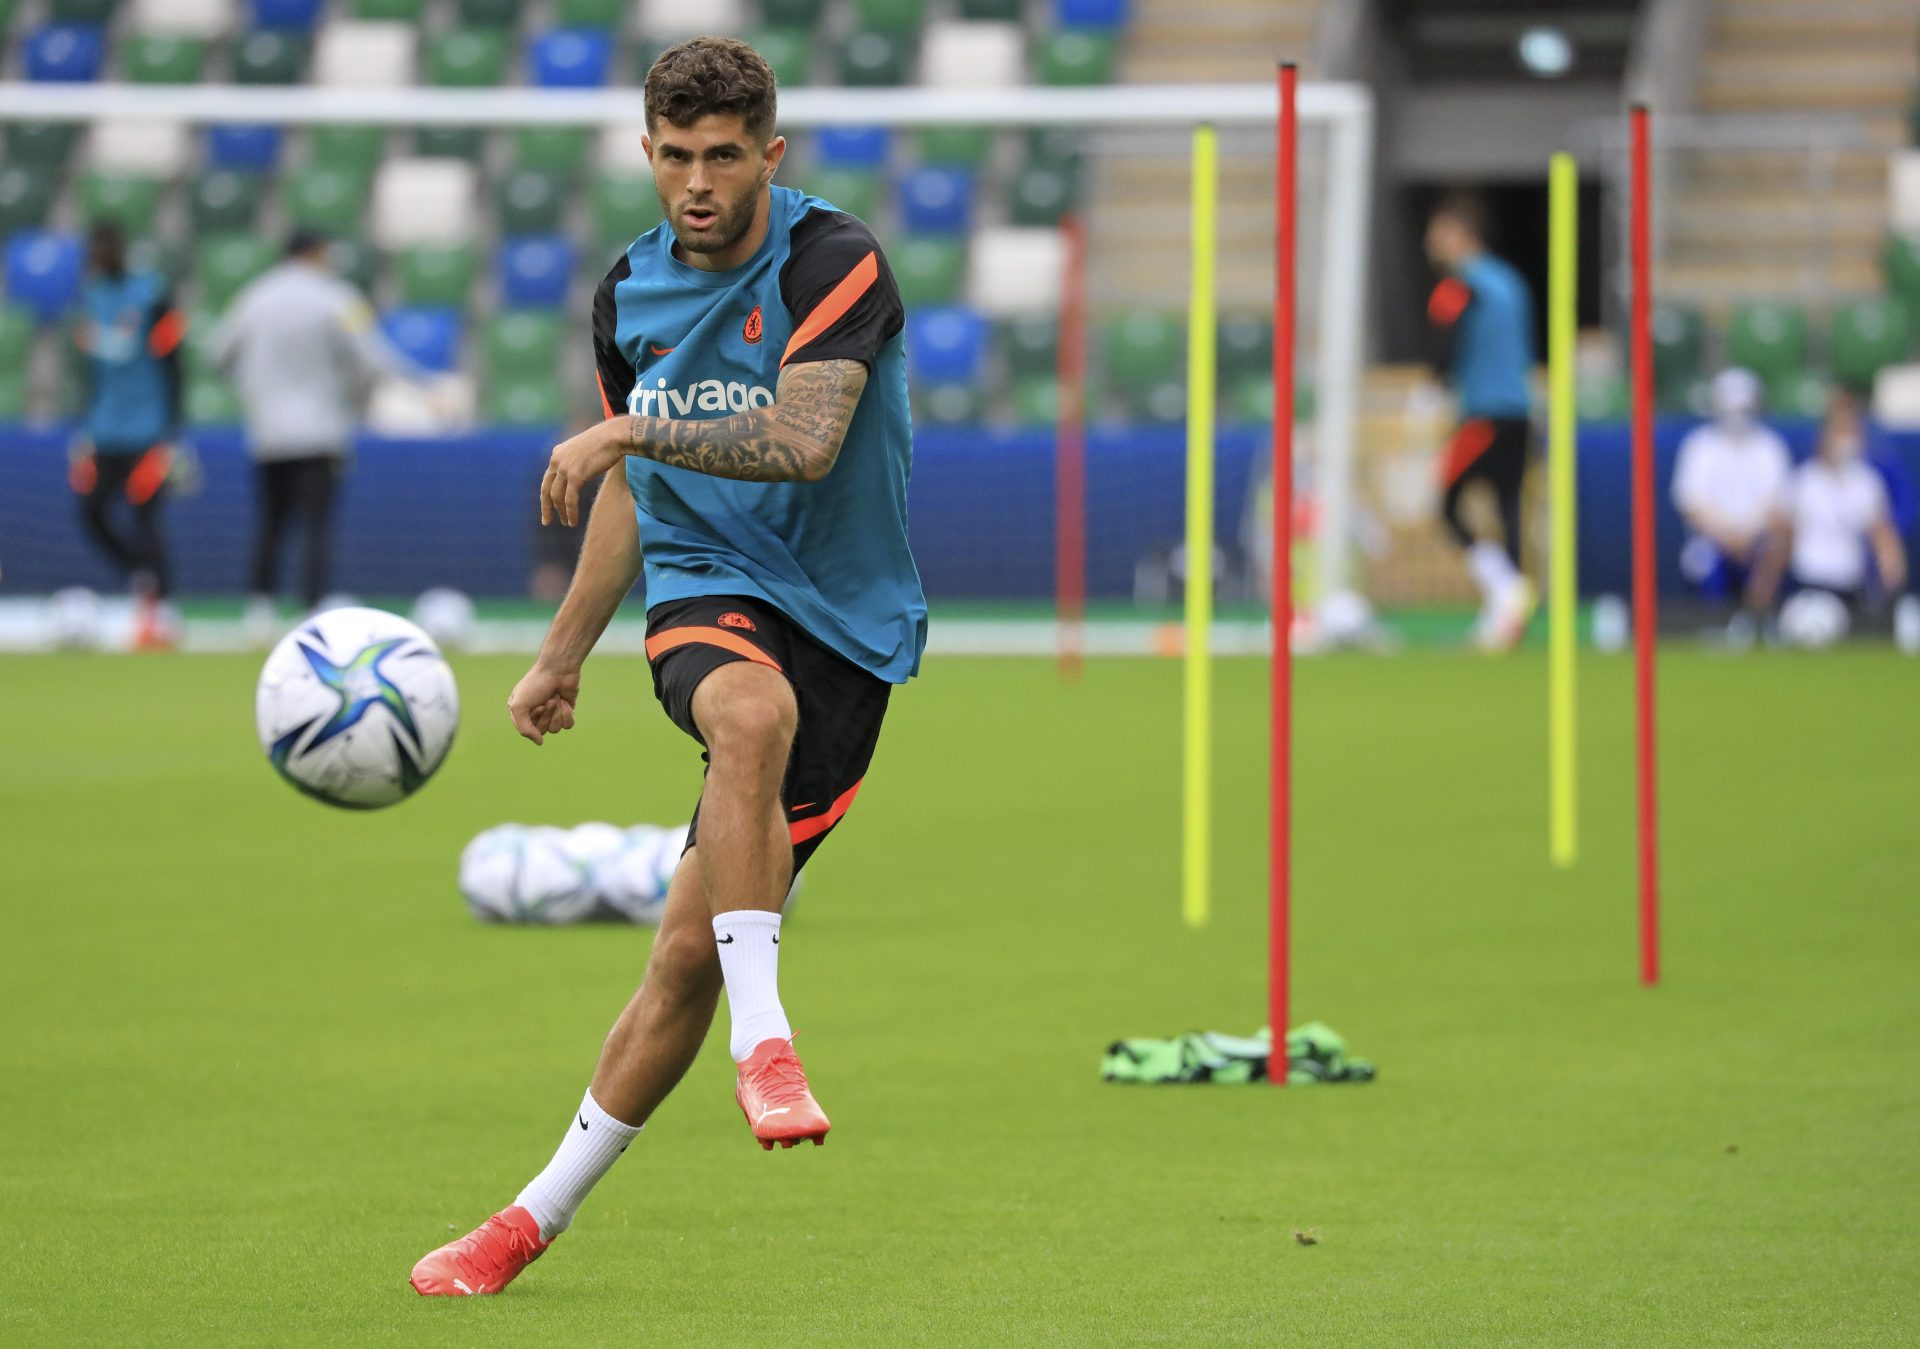 In this Aug. 10, 2021 file photo, Chelsea's Christian Pulisic kicks the ball during a training session at Windsor Park in Belfast, Northern Ireland.